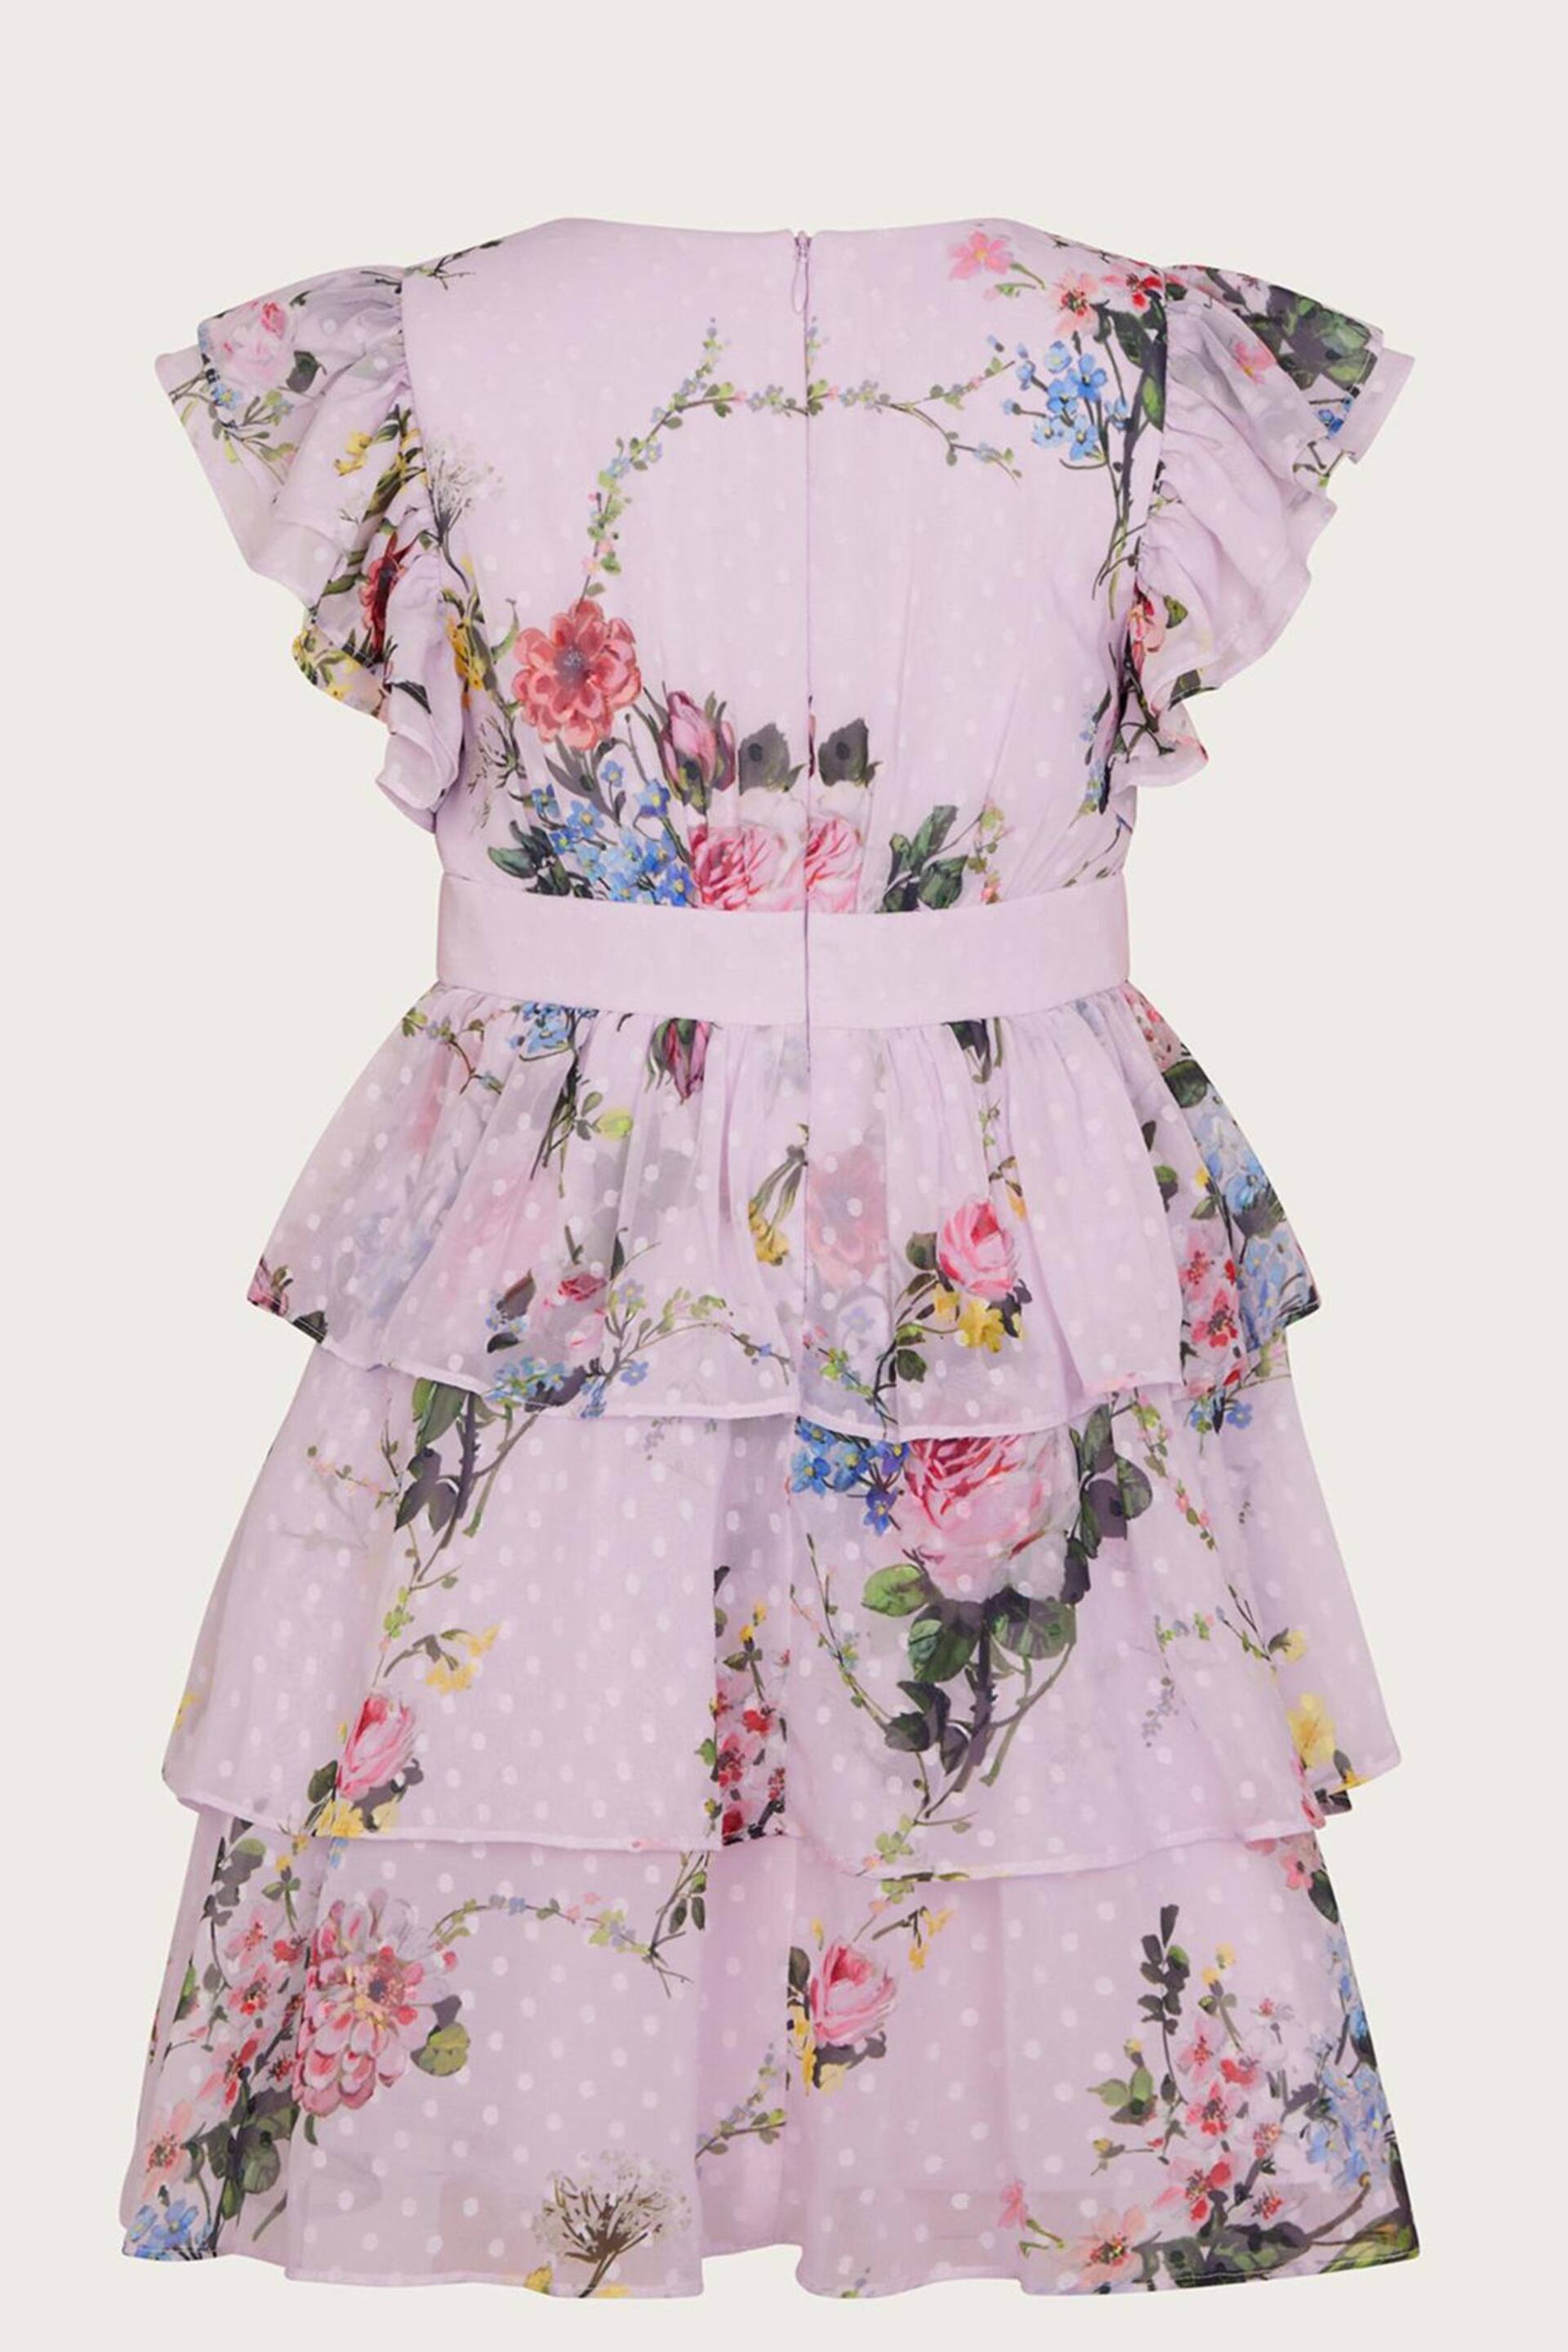 Monsoon Violetta Floral Tiered Dress - Image 3 of 3